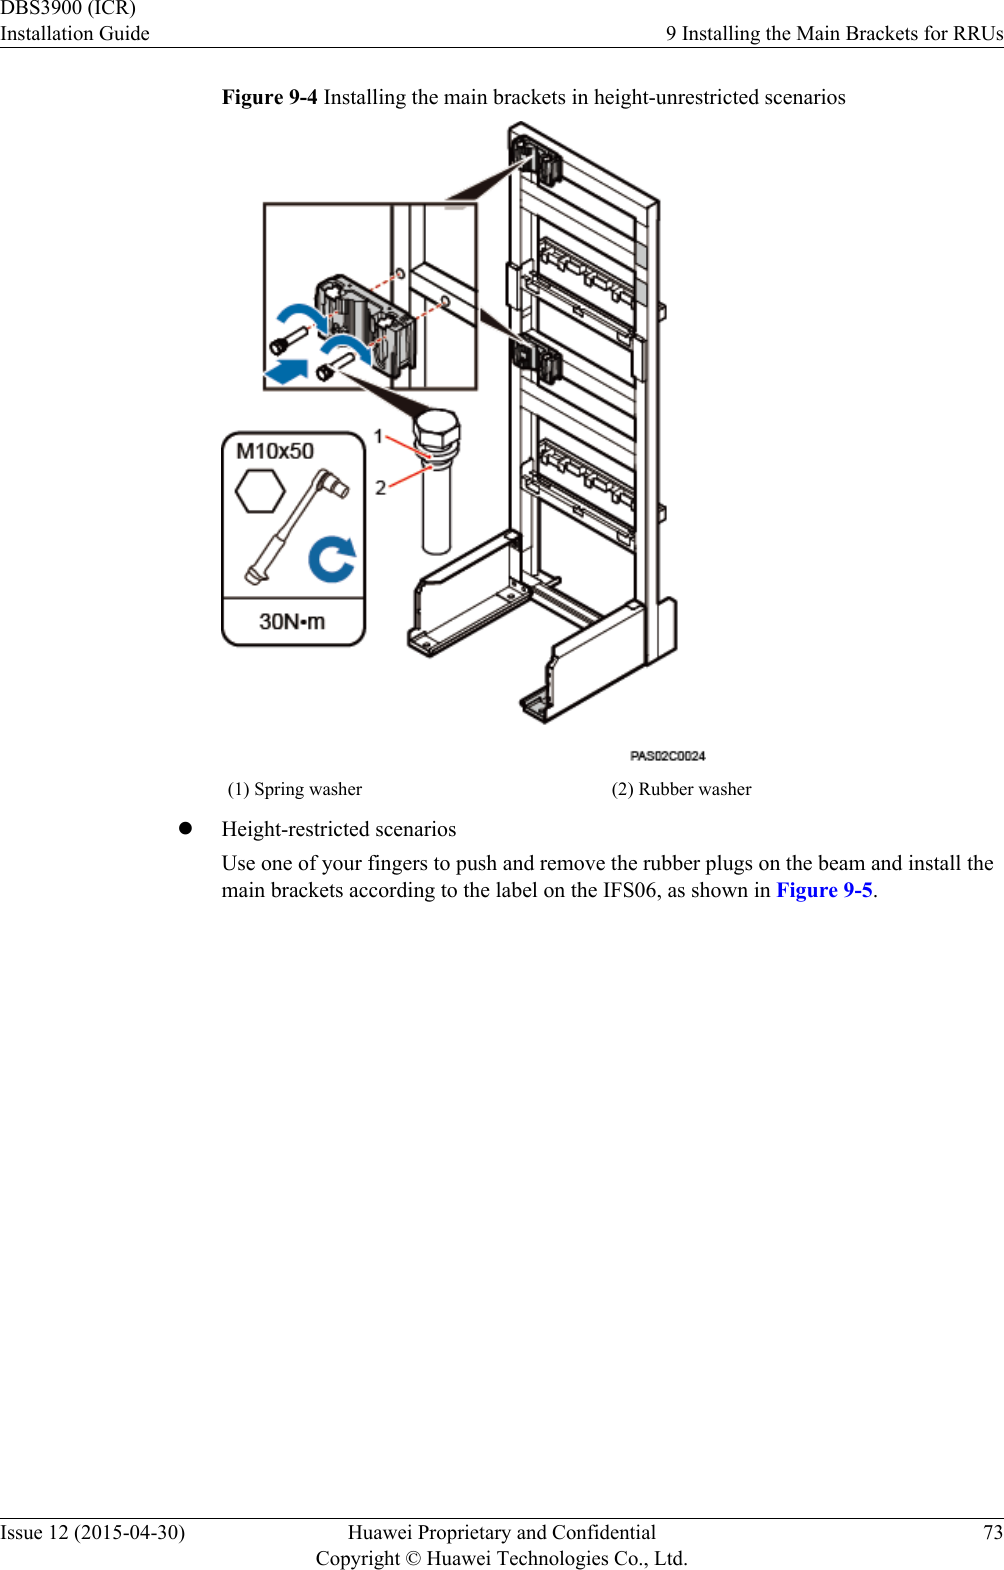 Figure 9-4 Installing the main brackets in height-unrestricted scenarios(1) Spring washer (2) Rubber washerlHeight-restricted scenariosUse one of your fingers to push and remove the rubber plugs on the beam and install themain brackets according to the label on the IFS06, as shown in Figure 9-5.DBS3900 (ICR)Installation Guide 9 Installing the Main Brackets for RRUsIssue 12 (2015-04-30) Huawei Proprietary and ConfidentialCopyright © Huawei Technologies Co., Ltd.73